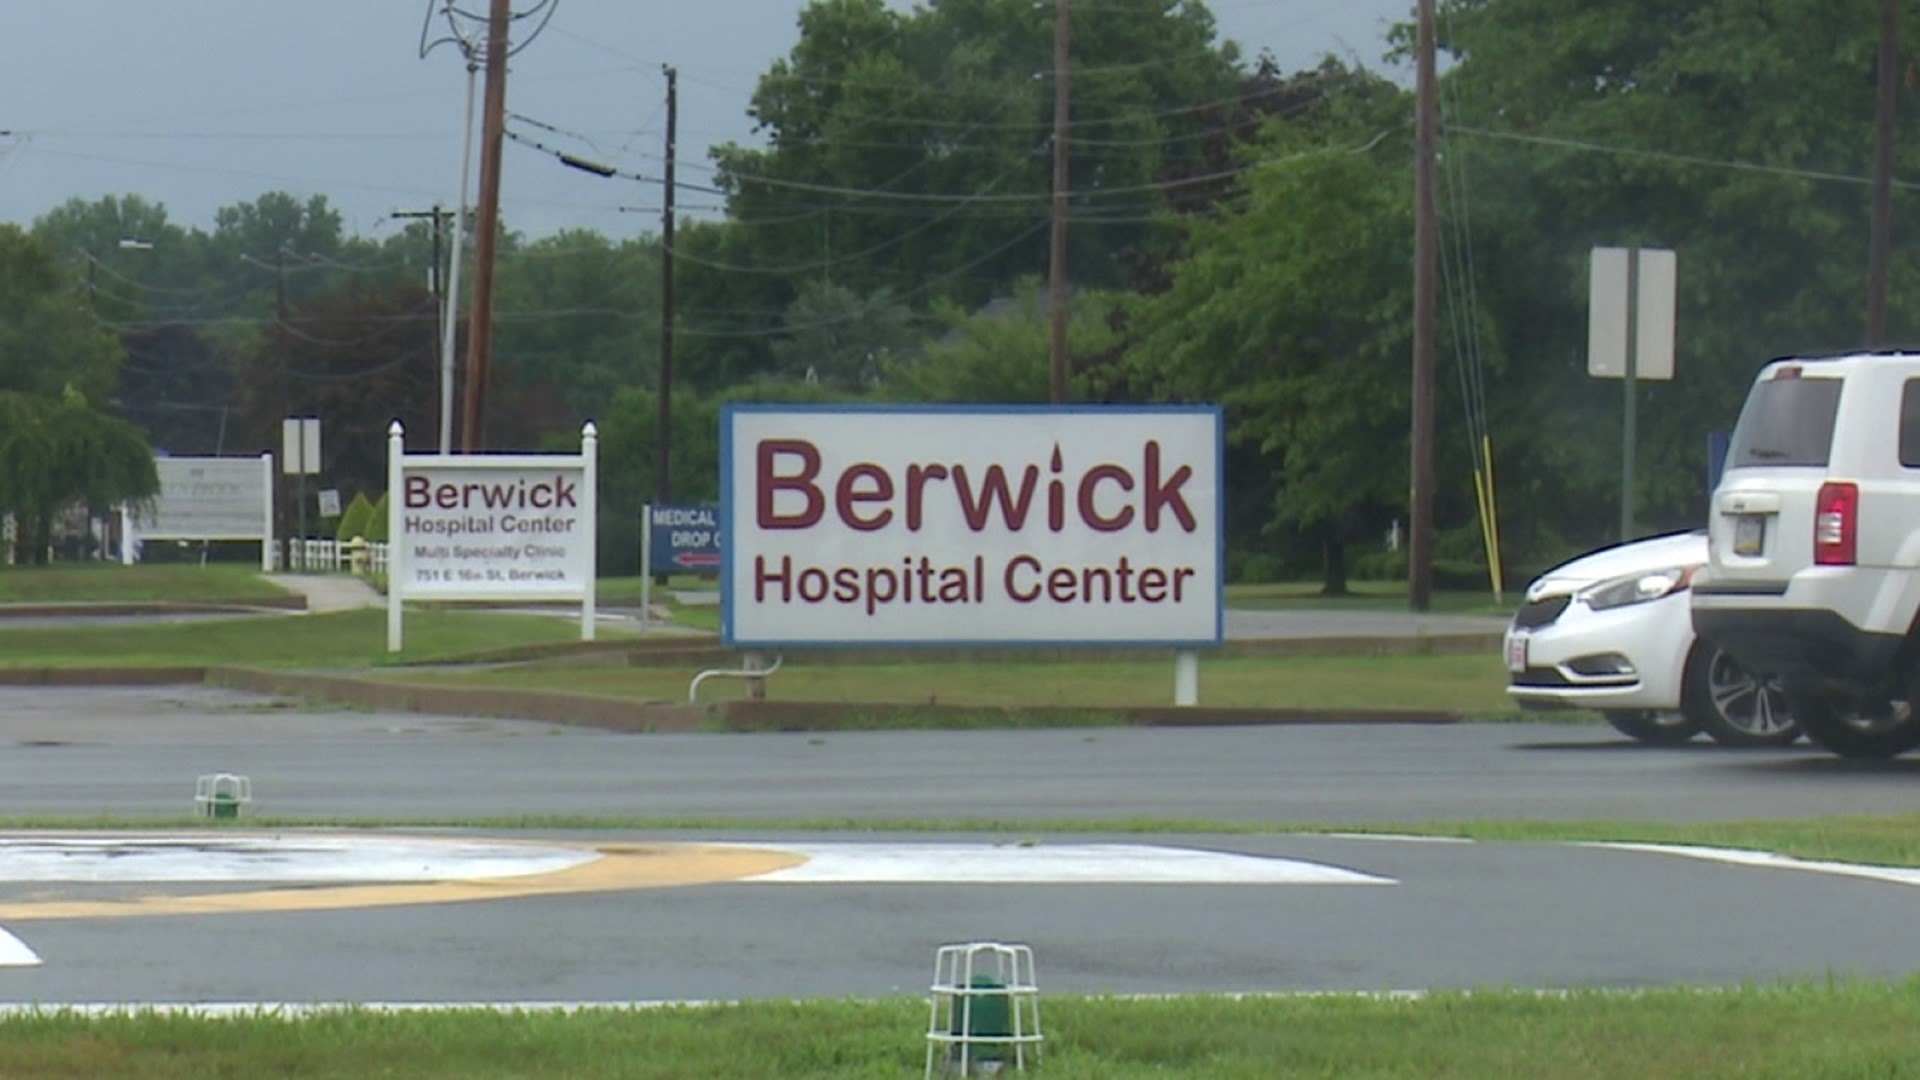 The owner of Berwick Hospital Center has filed for Chapter 11 bankruptcy protection for the hospital.